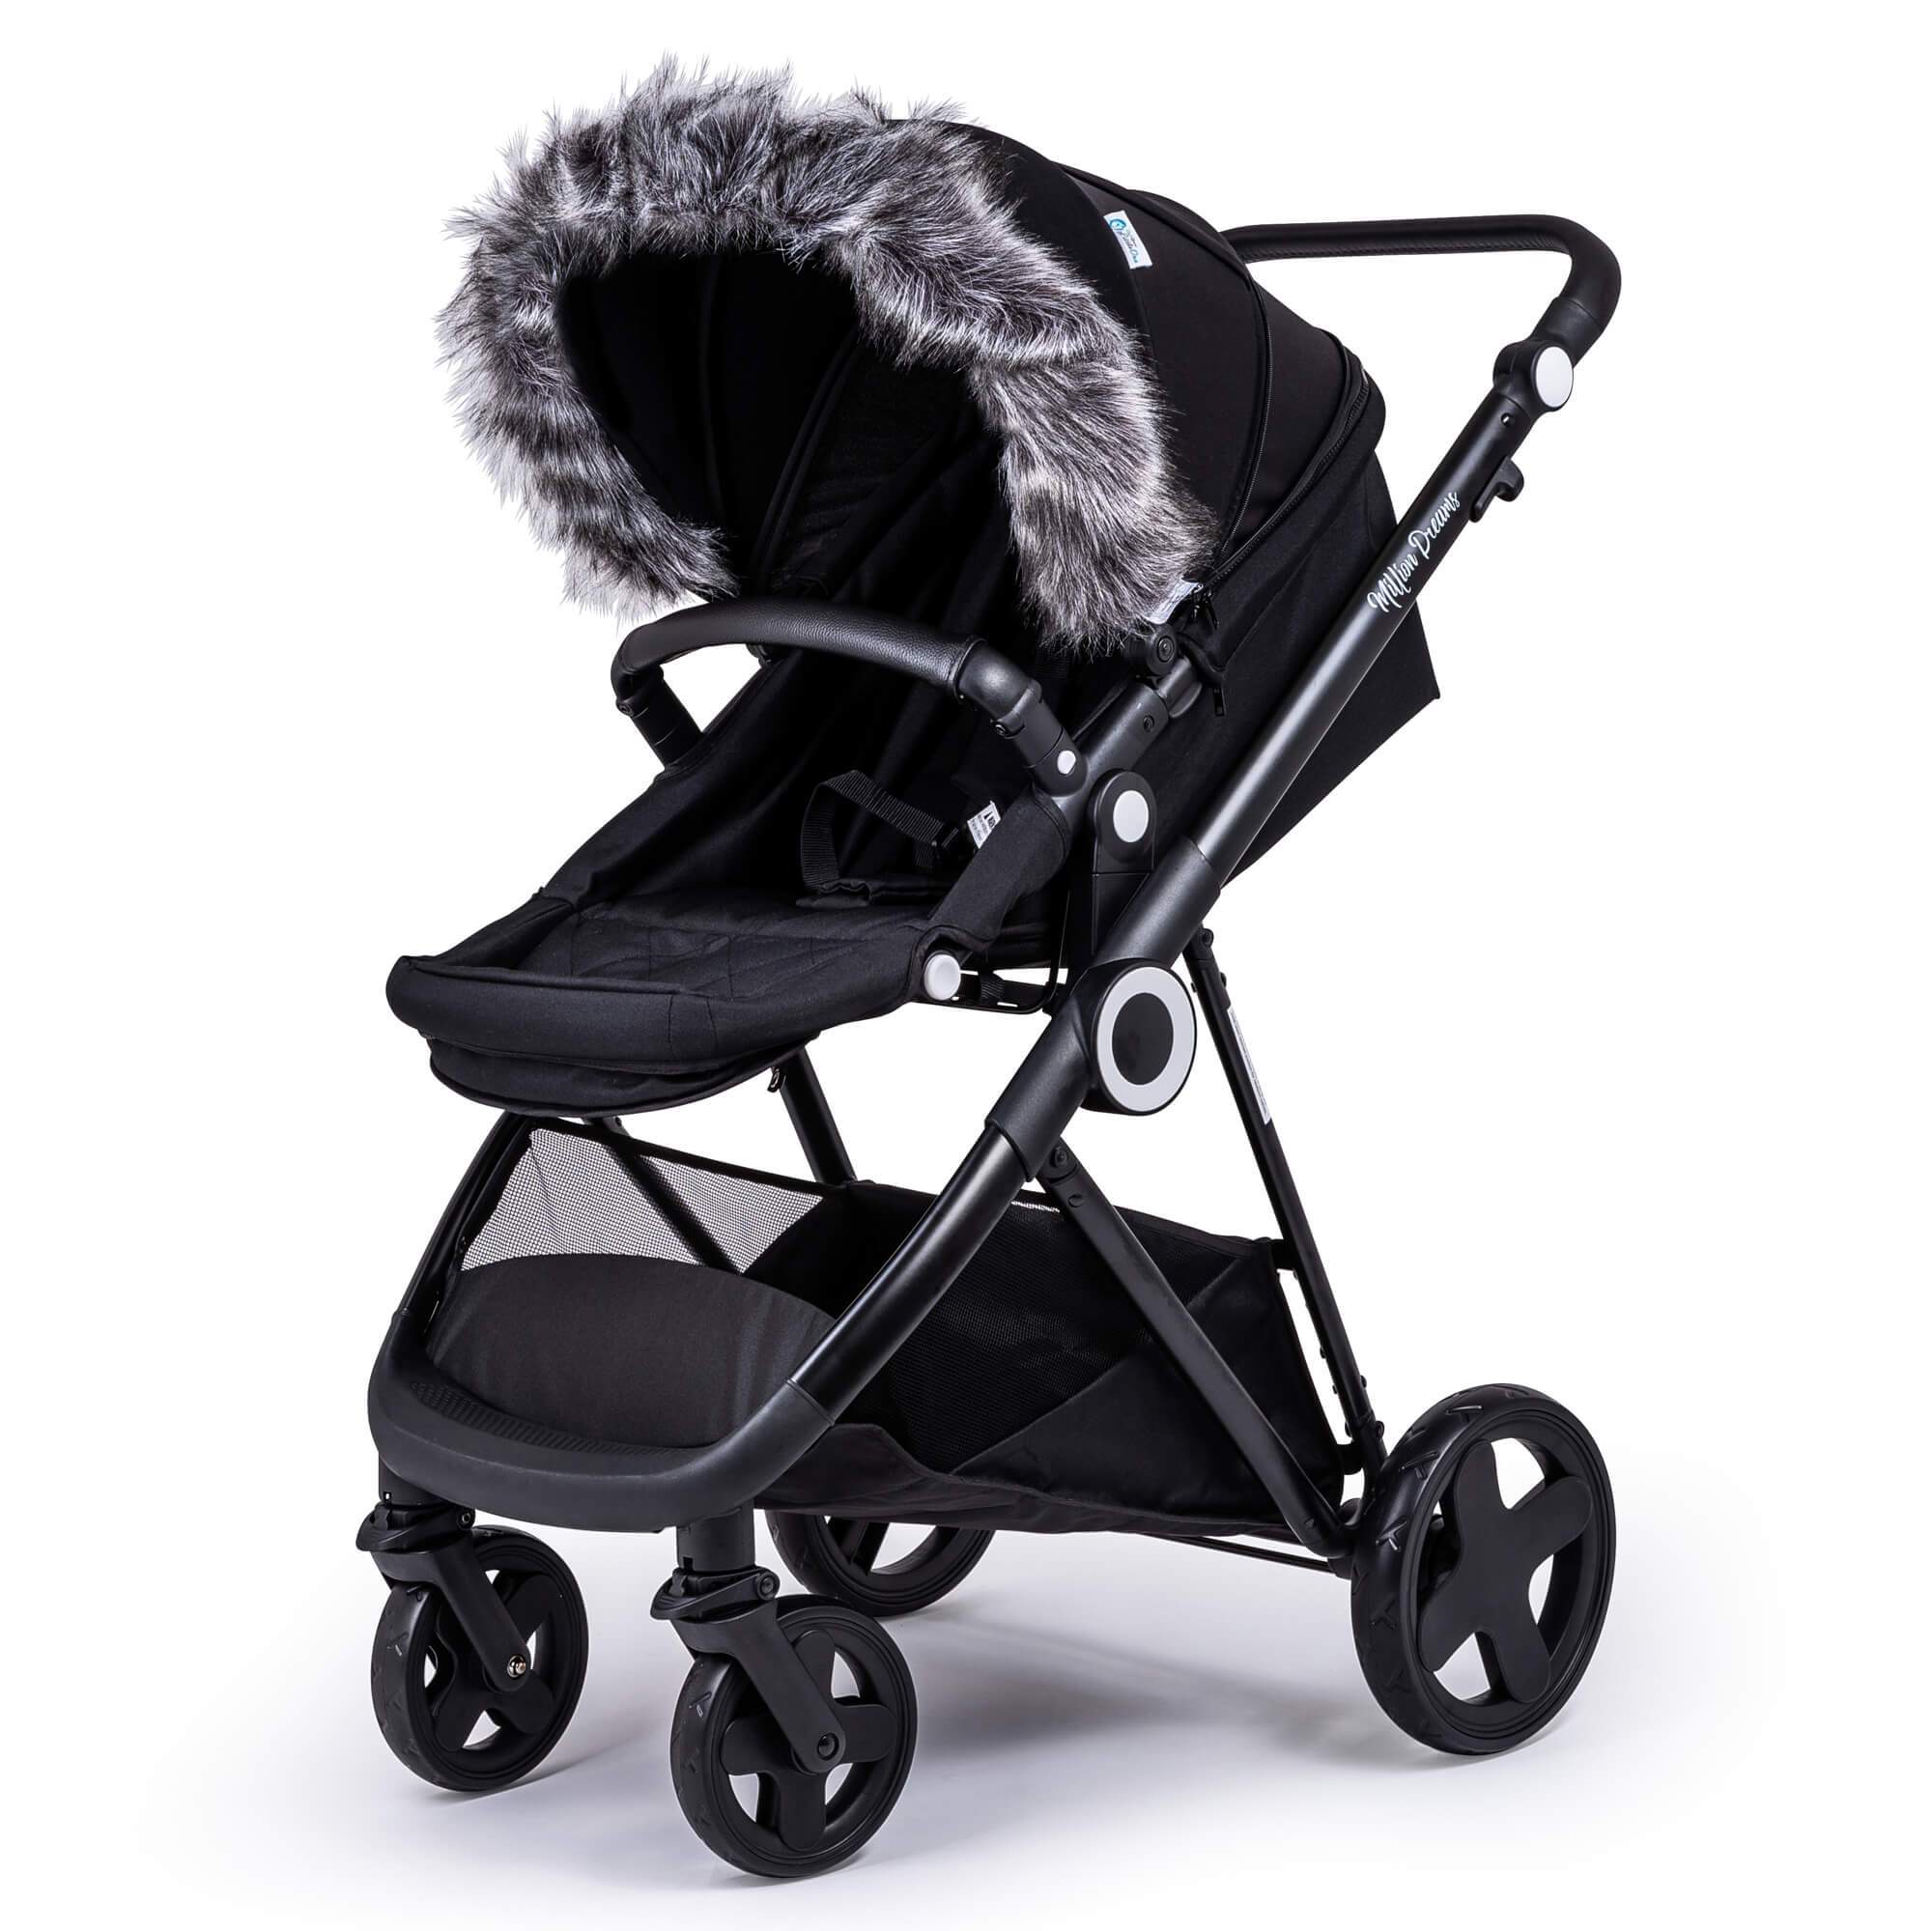 Pram Fur Hood Trim Attachment for Pushchair Compatible with Valco - Dark Grey / Fits All Models | For Your Little One